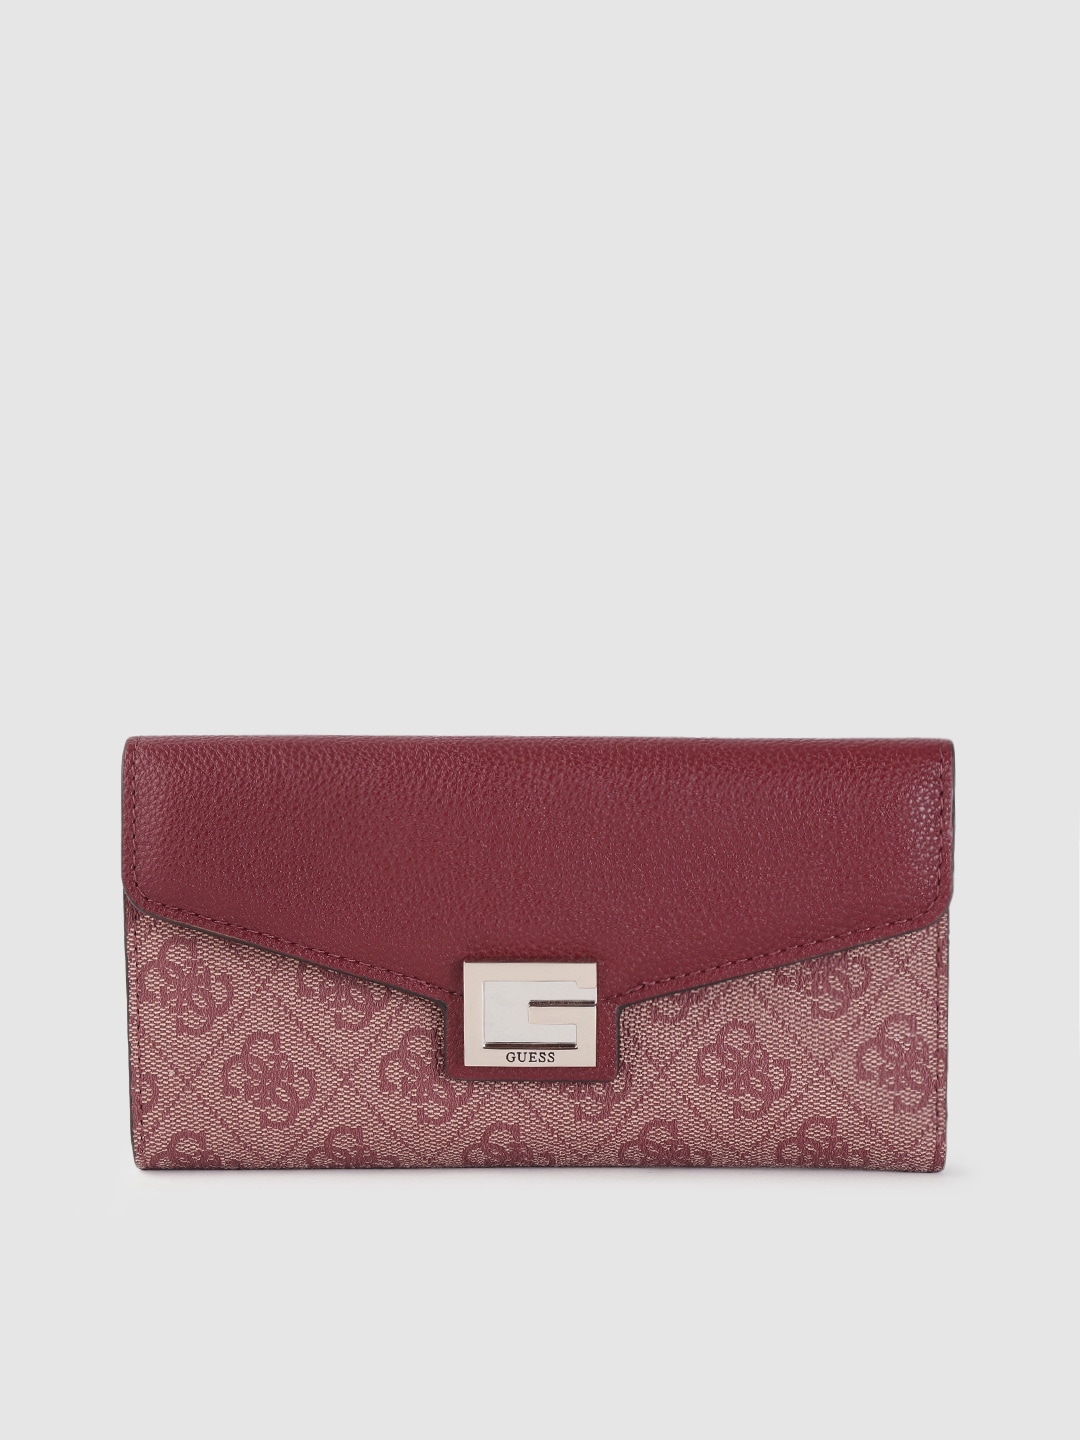 GUESS Women Maroon & Beige Brand Logo Printed Three Fold Wallet Price in India